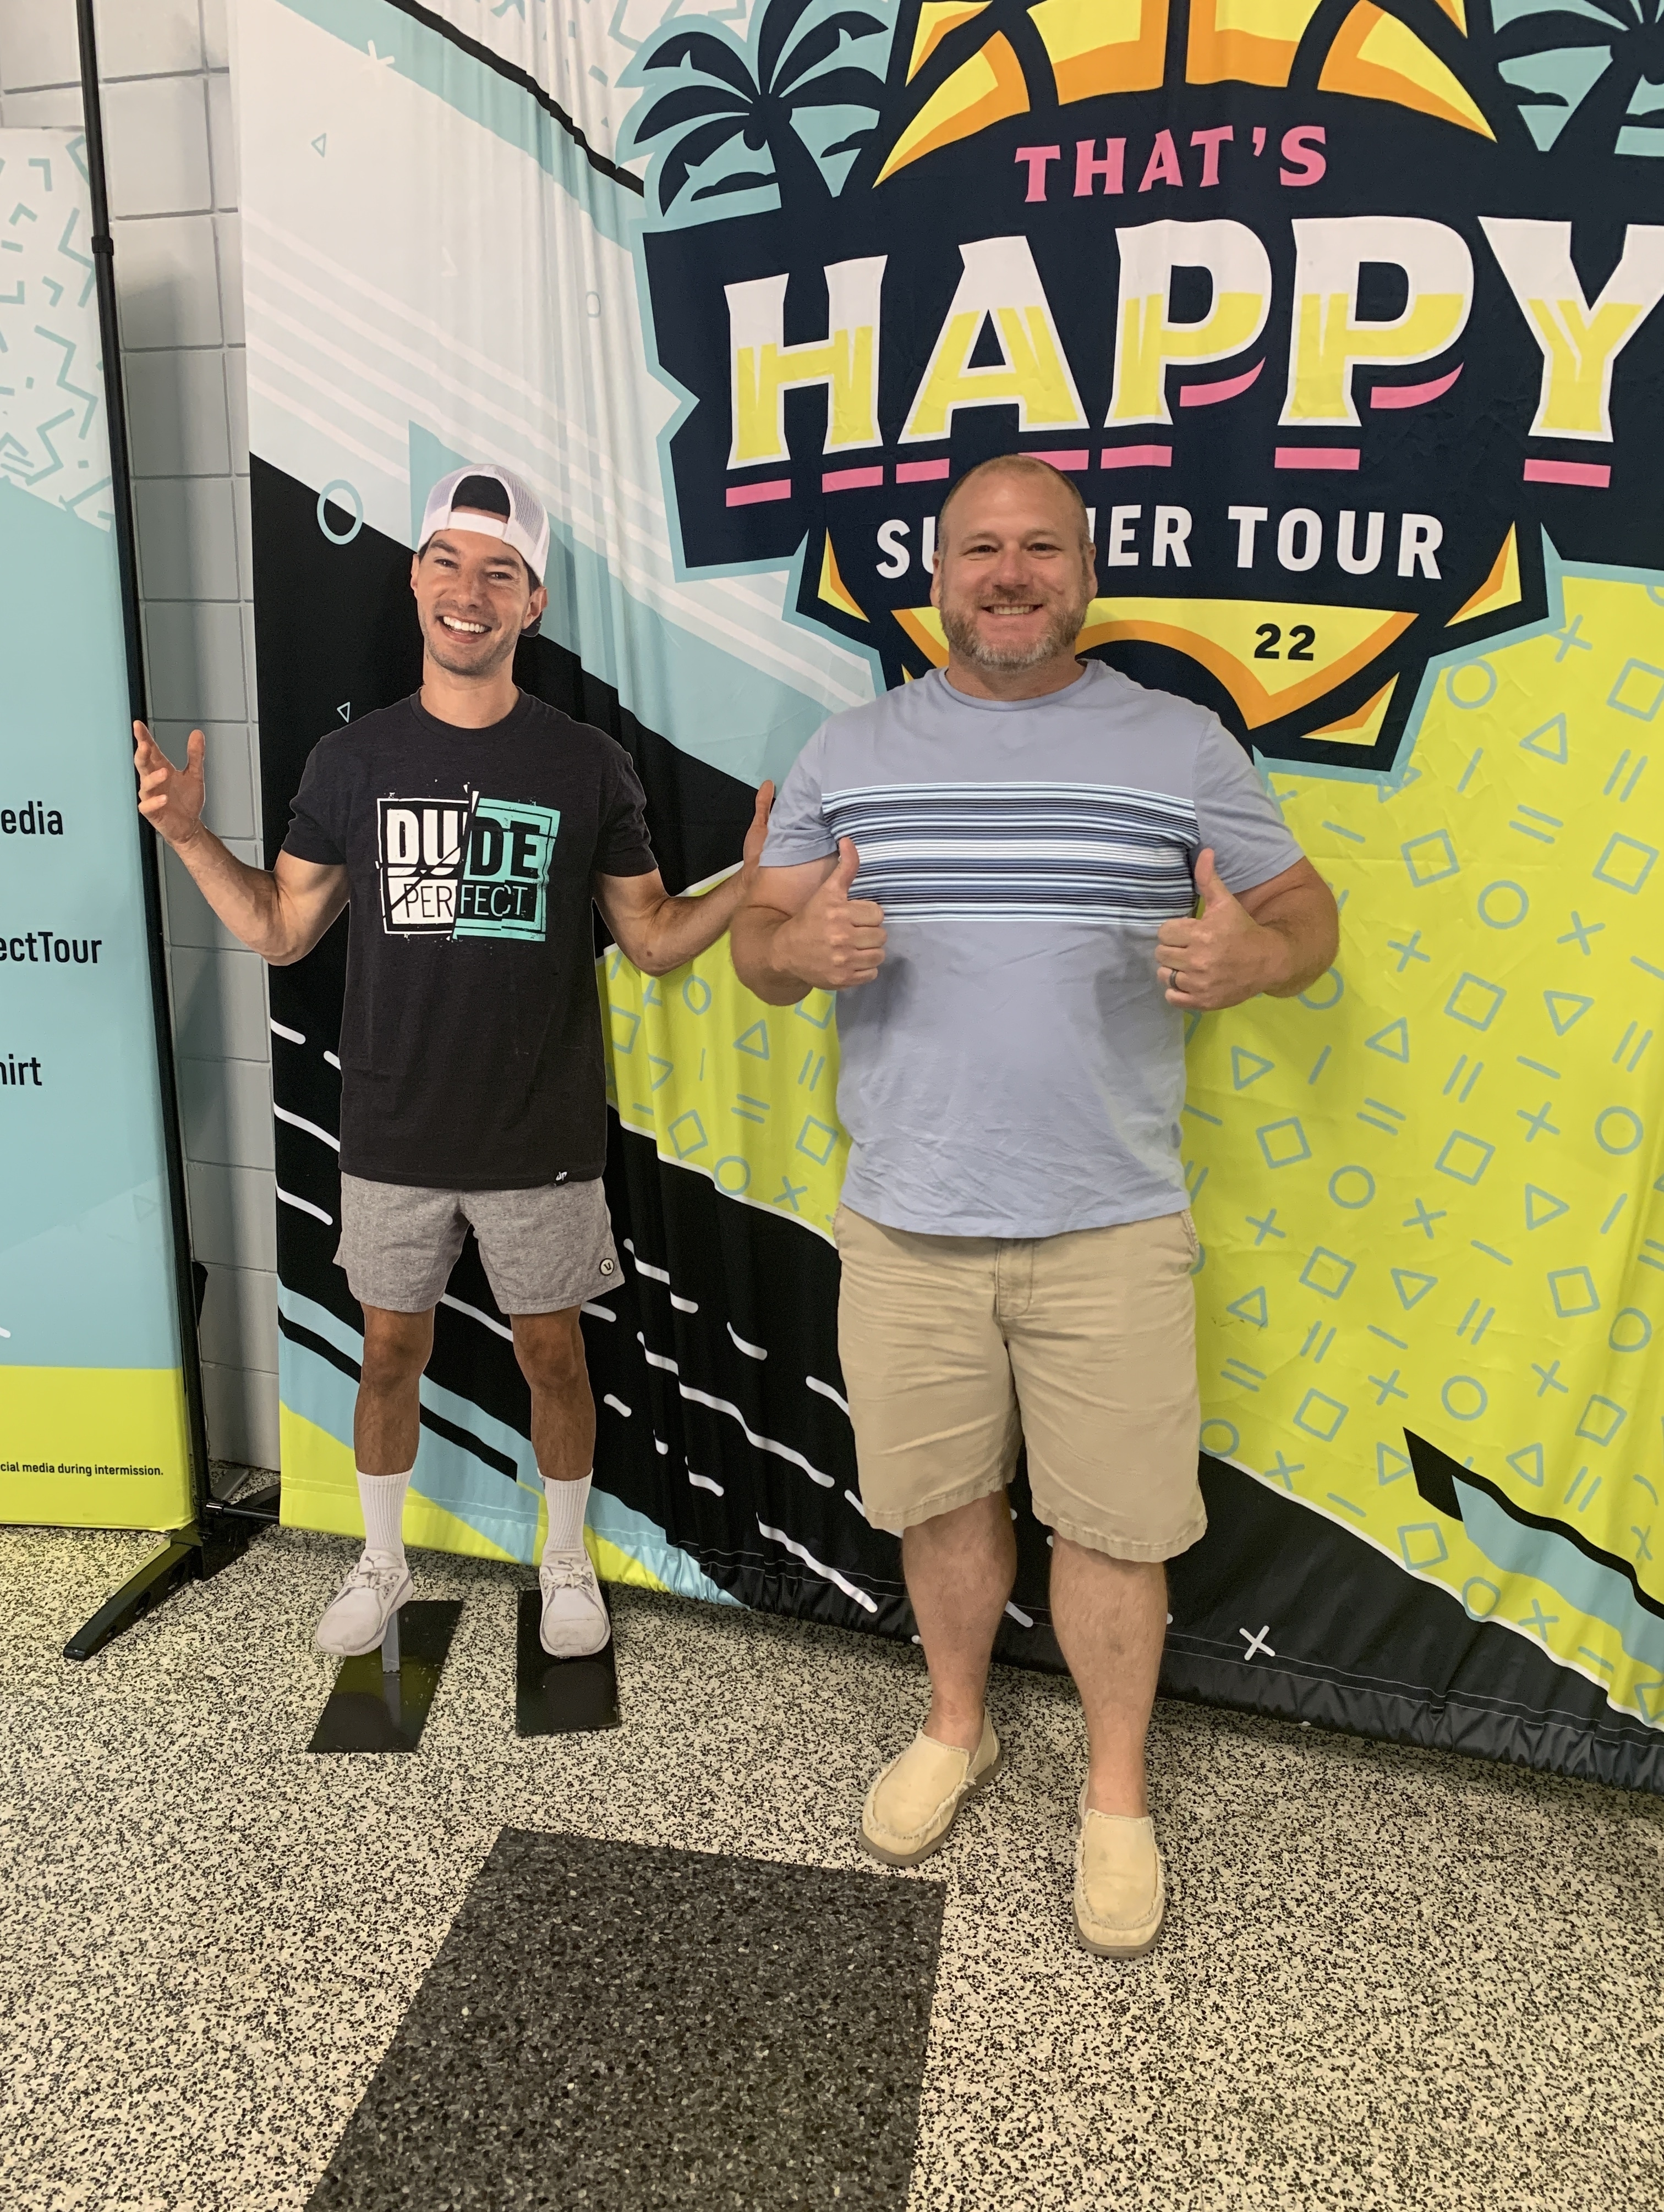 Dude Perfect: Thats Happy Tour 2022